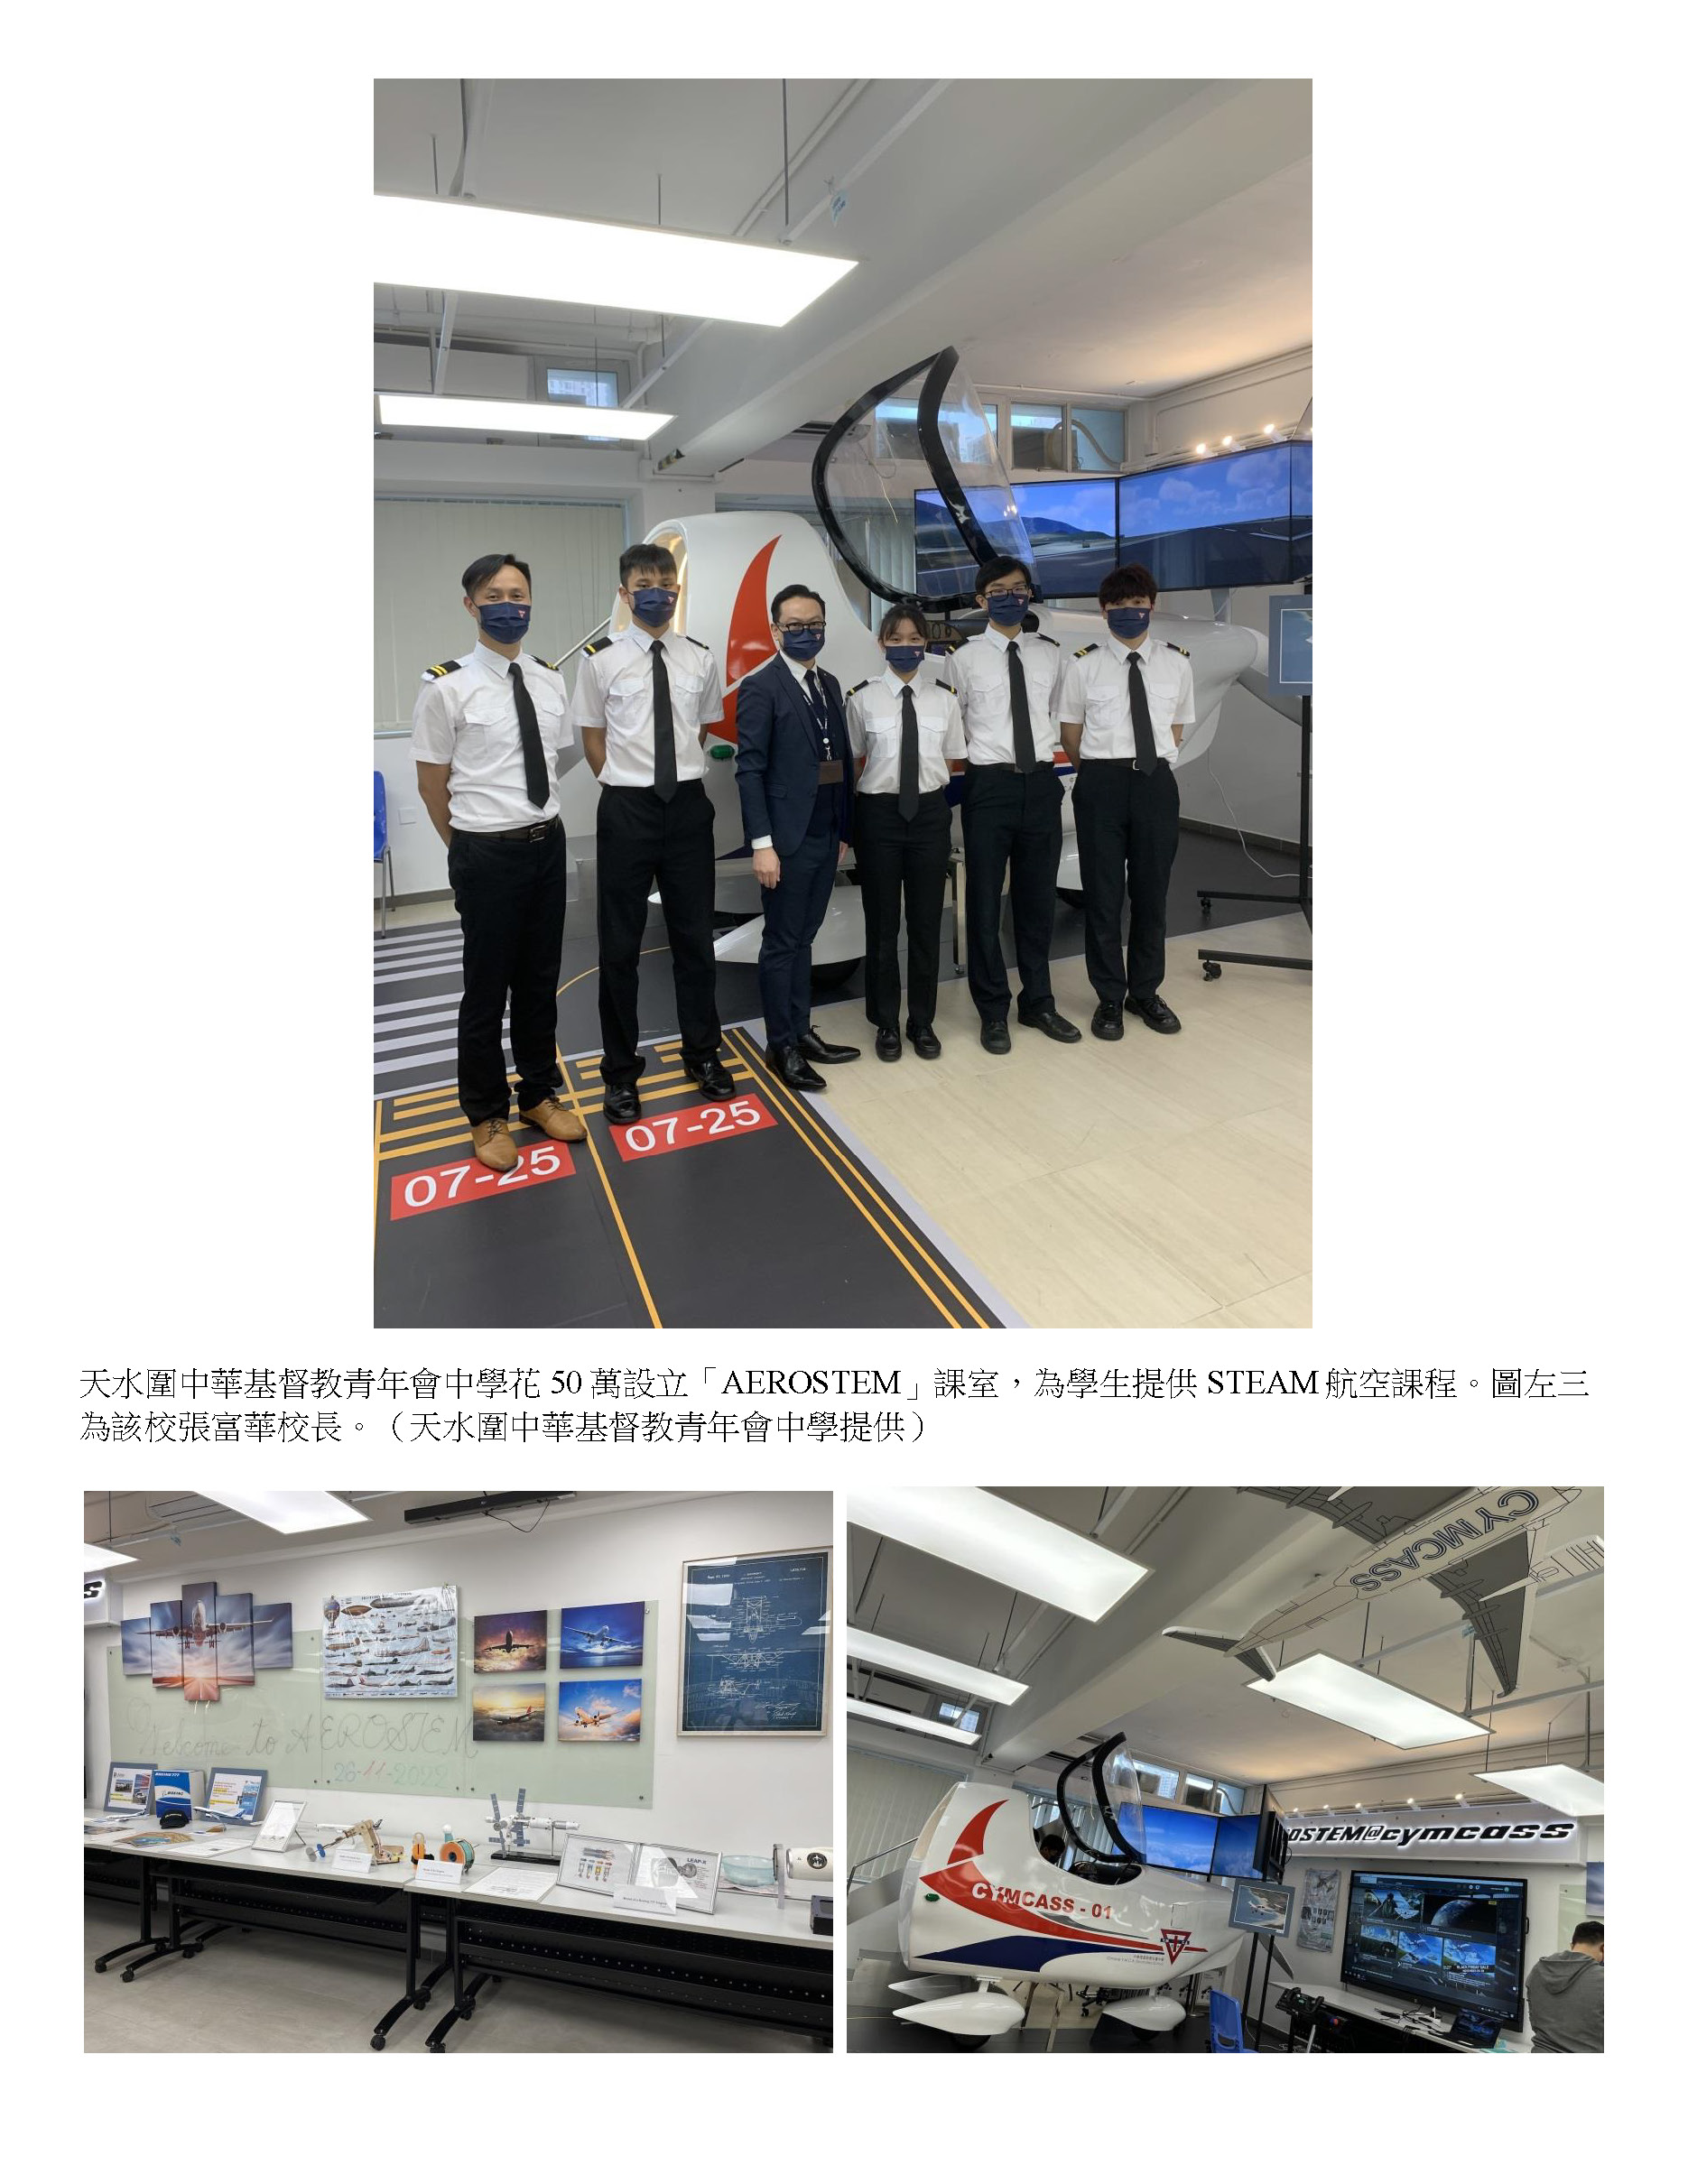 Chinese Y.M.C.A. Secondary School AEROSTEM Education. The first D40 flight simulator in Hong Kong school